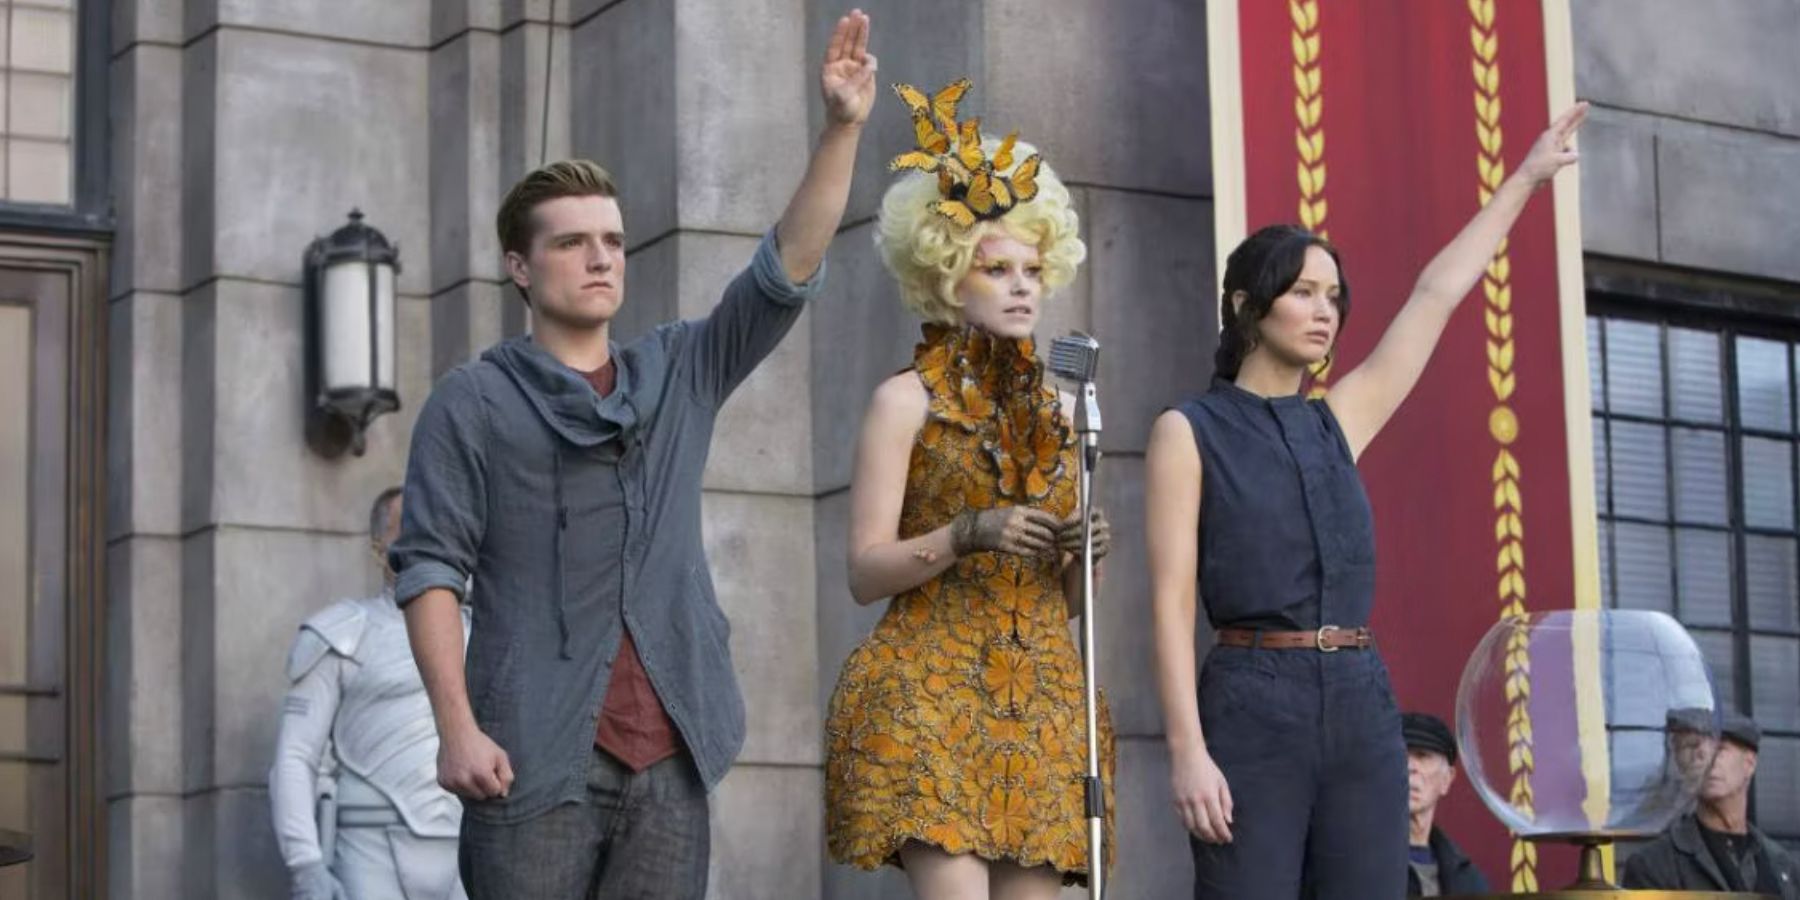 Peeta and Katniss giving the three finger salute while Effie speaks at the microphine in Hunger Games Catching Fire